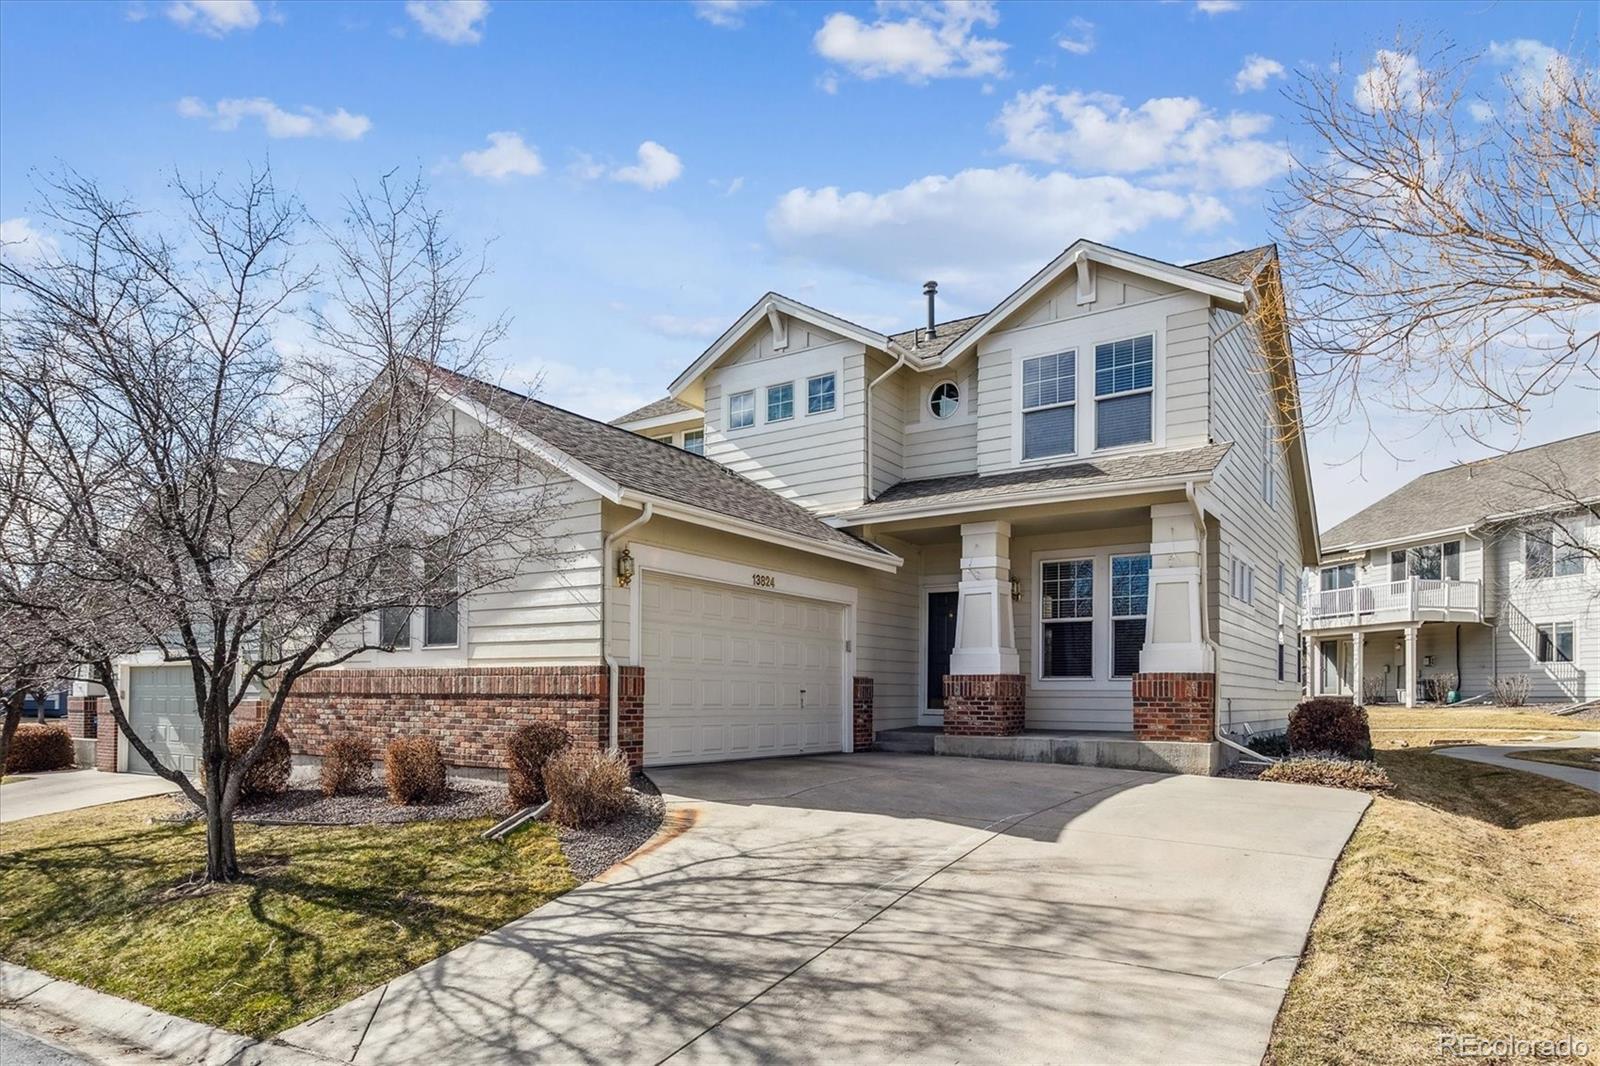 13824 w 61st circle, arvada sold home. Closed on 2024-05-07 for $735,000.